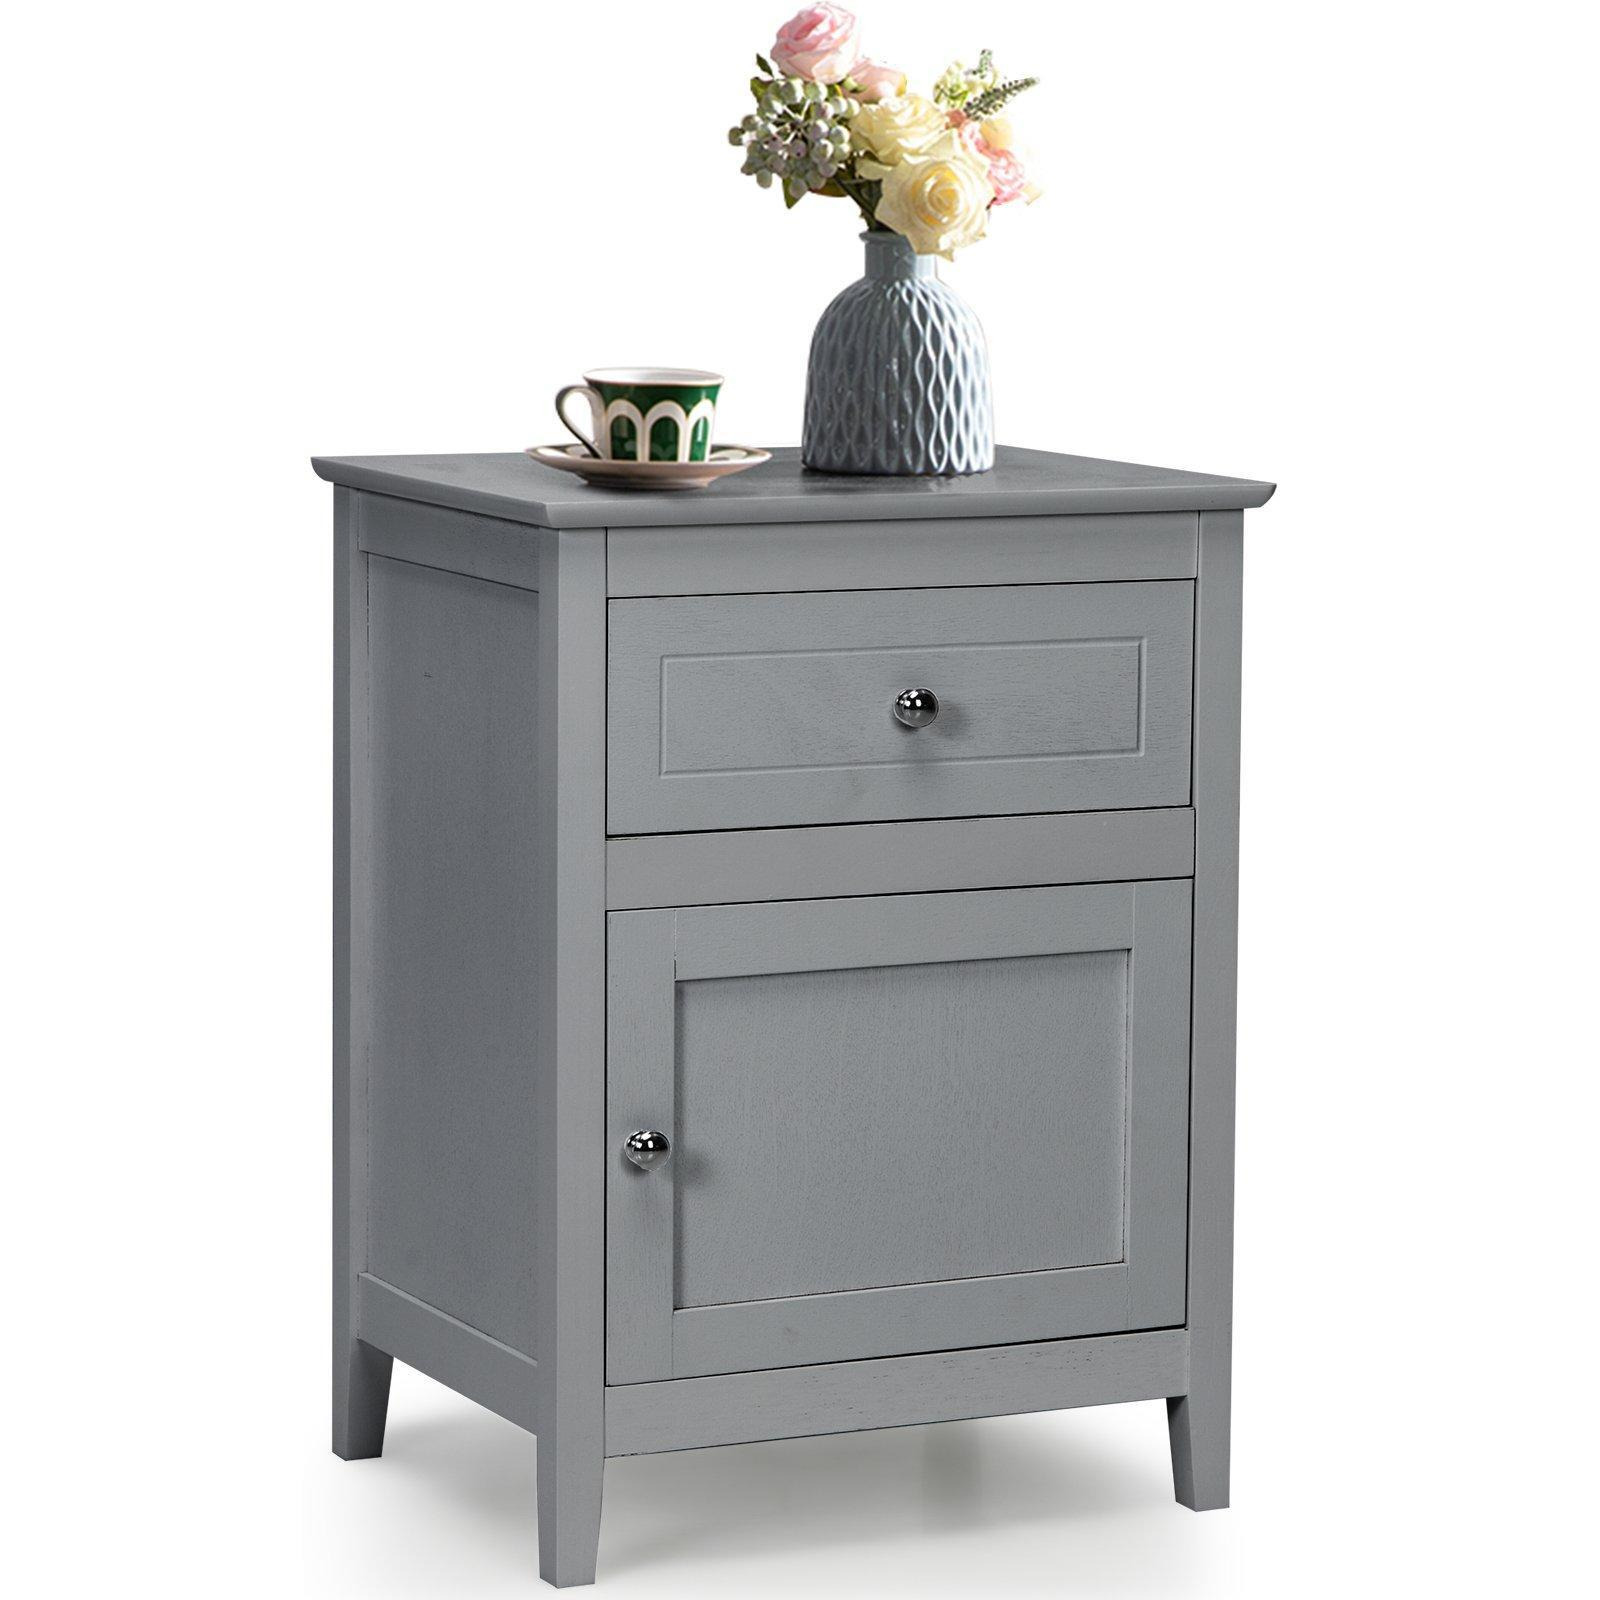 2-Tier Modern Badroom Nightstand with Drawer - image 1